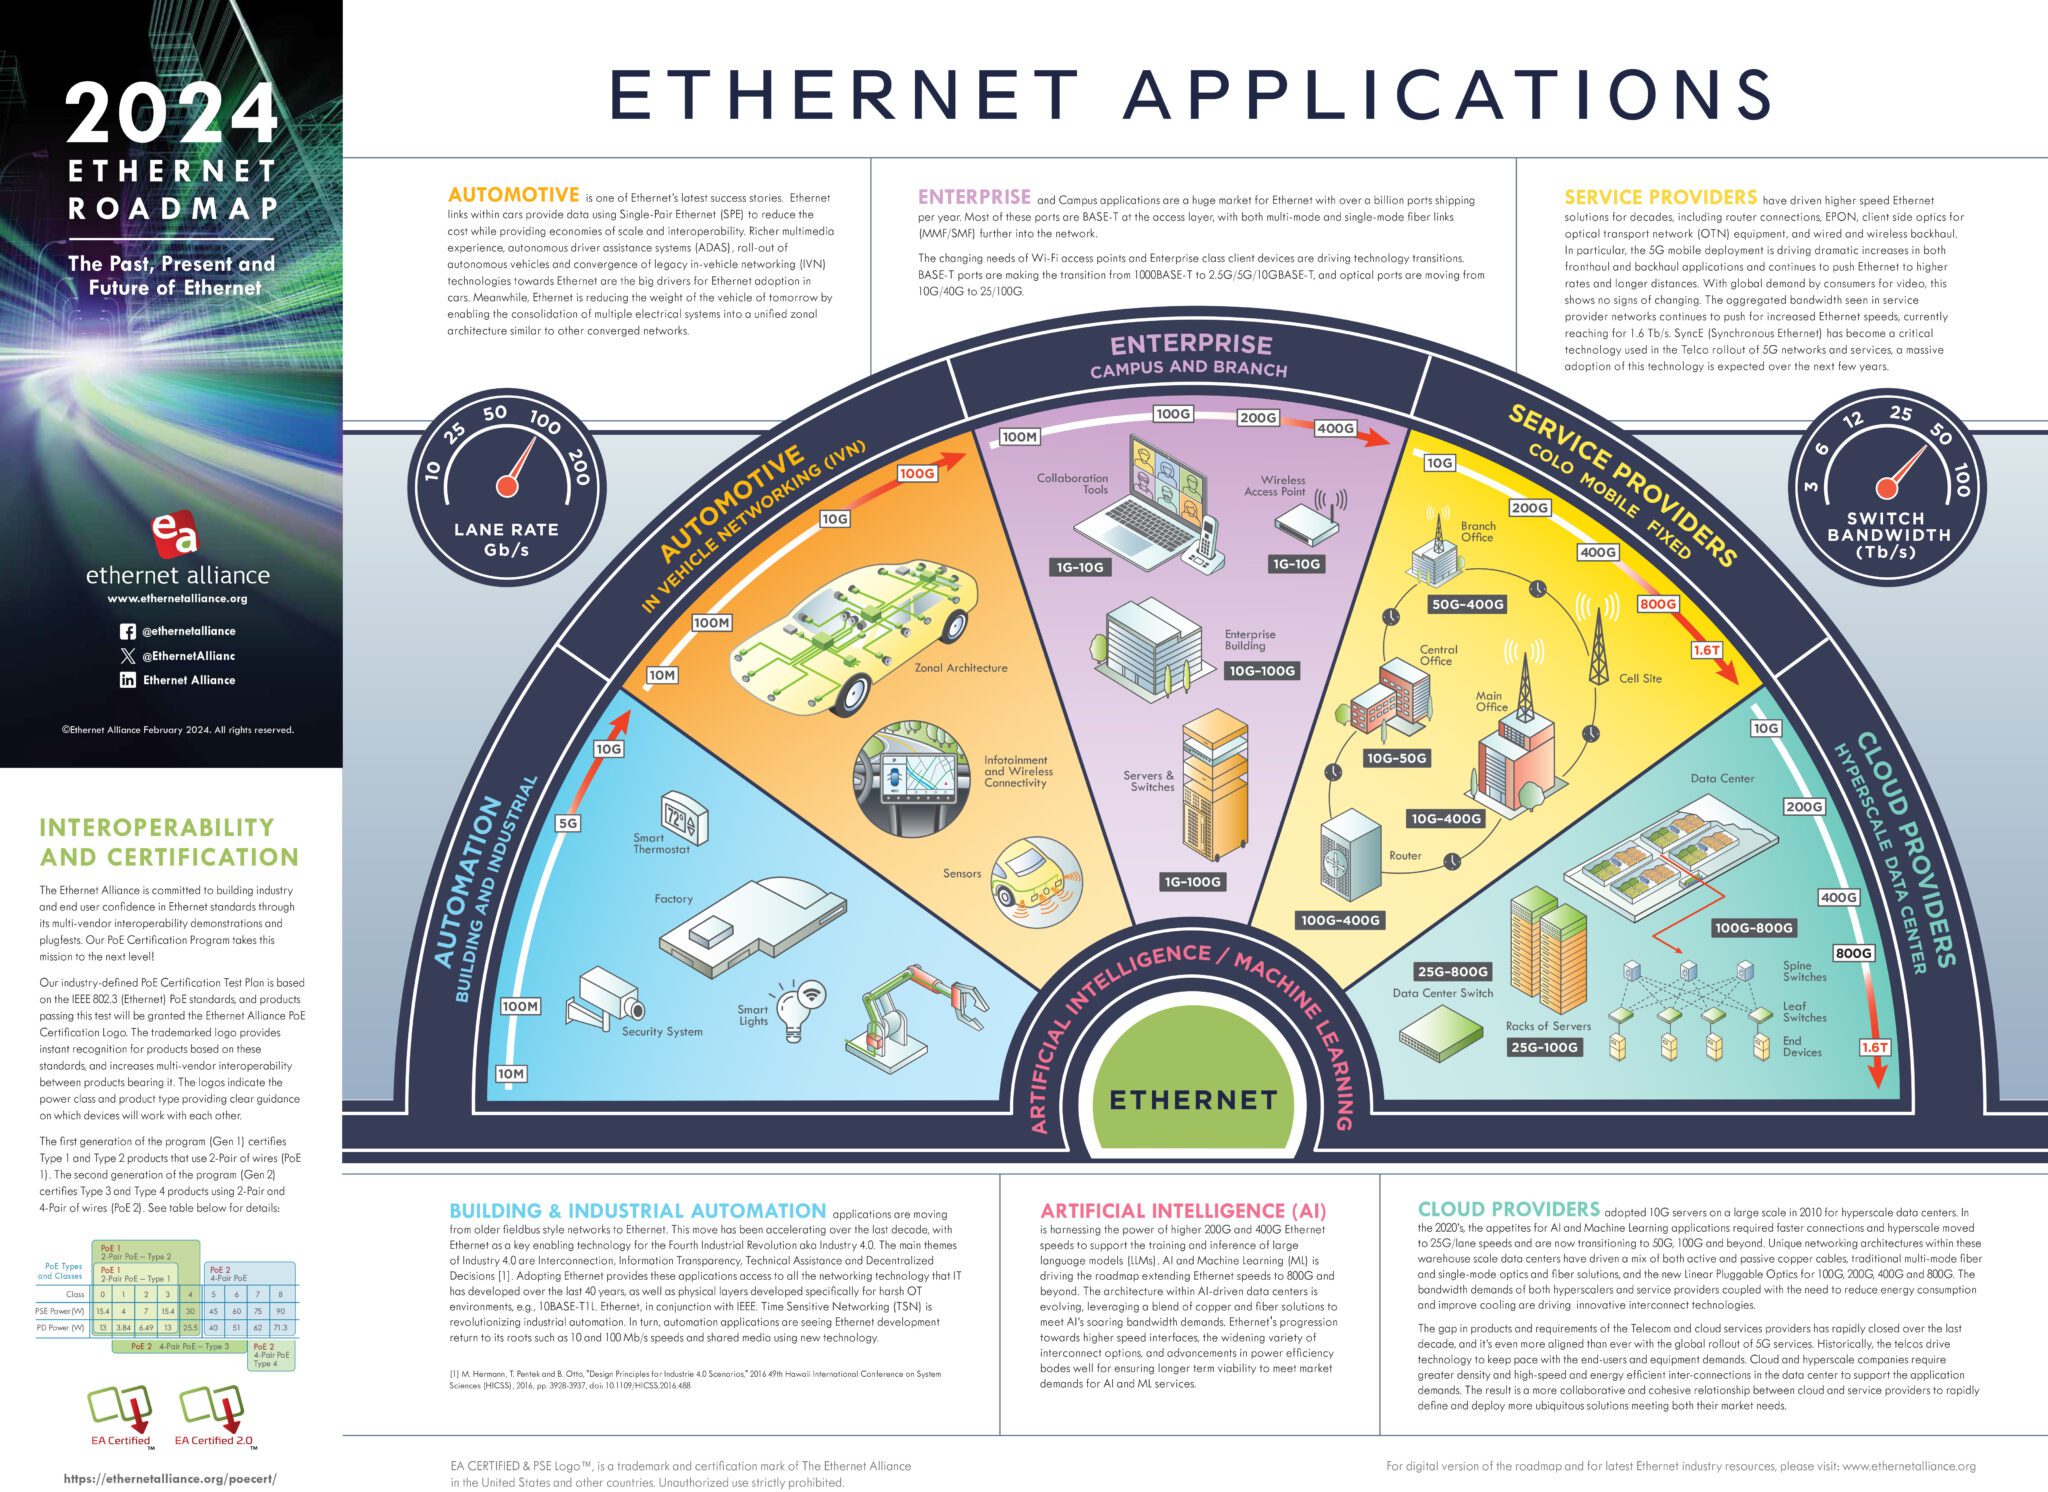 Also debuting at OFC, the 2024 edition of the Ethernet Alliance Ethernet Roadmap 